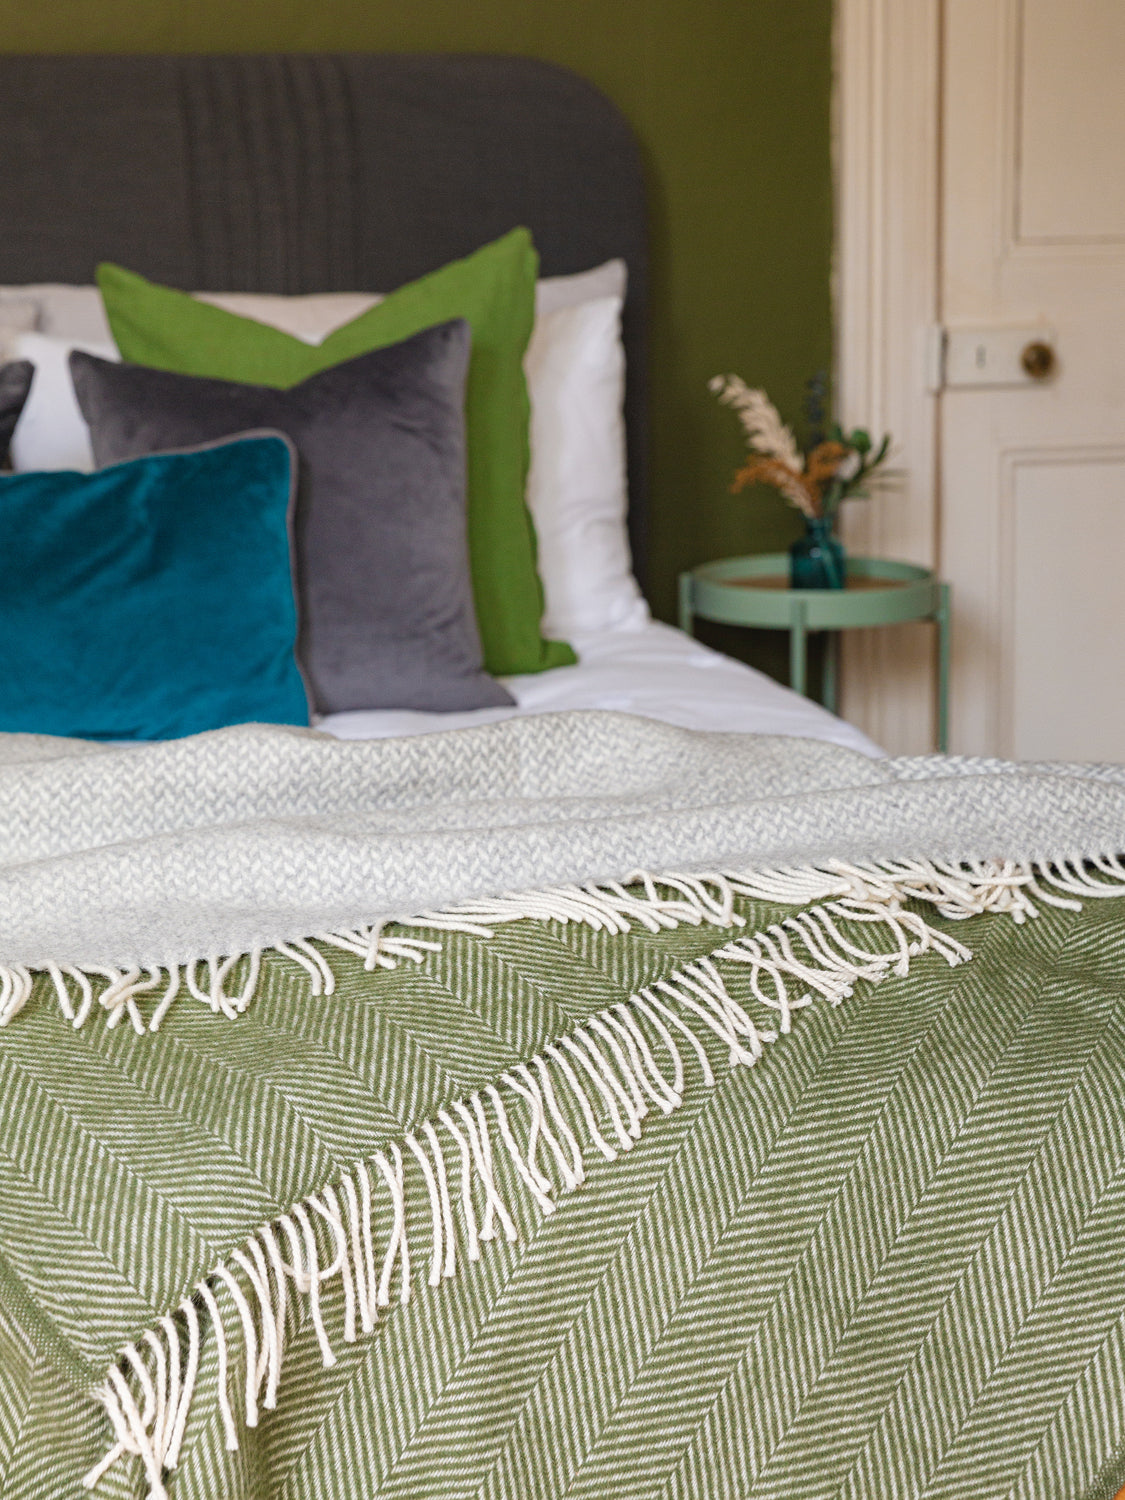 Two grey and green wool blankets draped across a bed